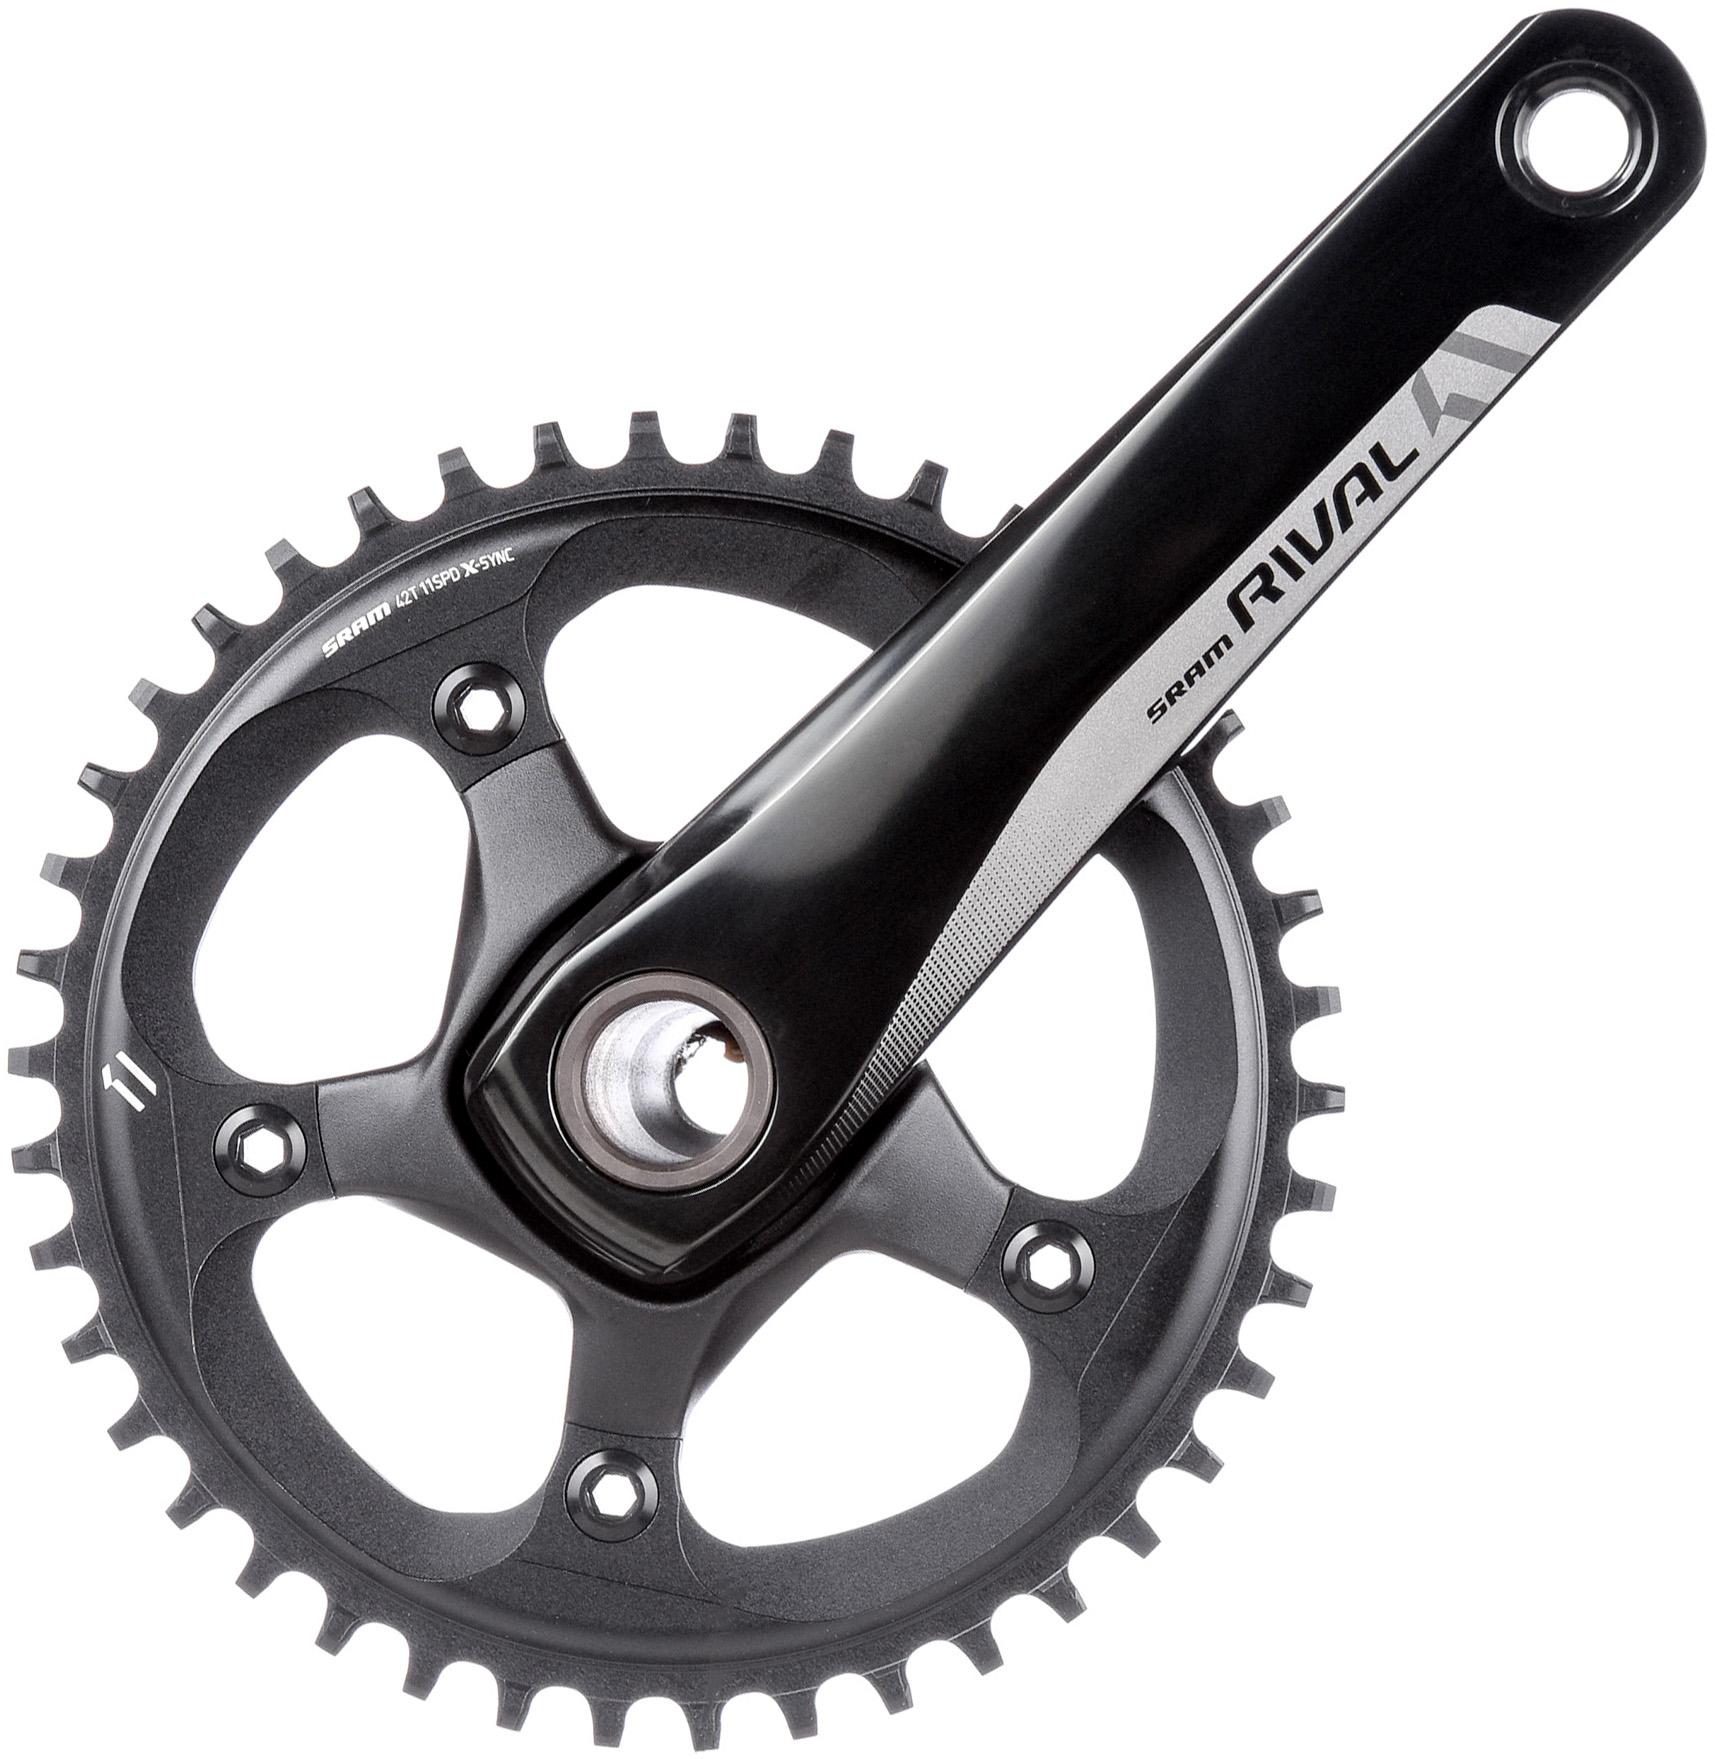 Sram Rival 1 Gxp 11 Speed Road Chainset  Black